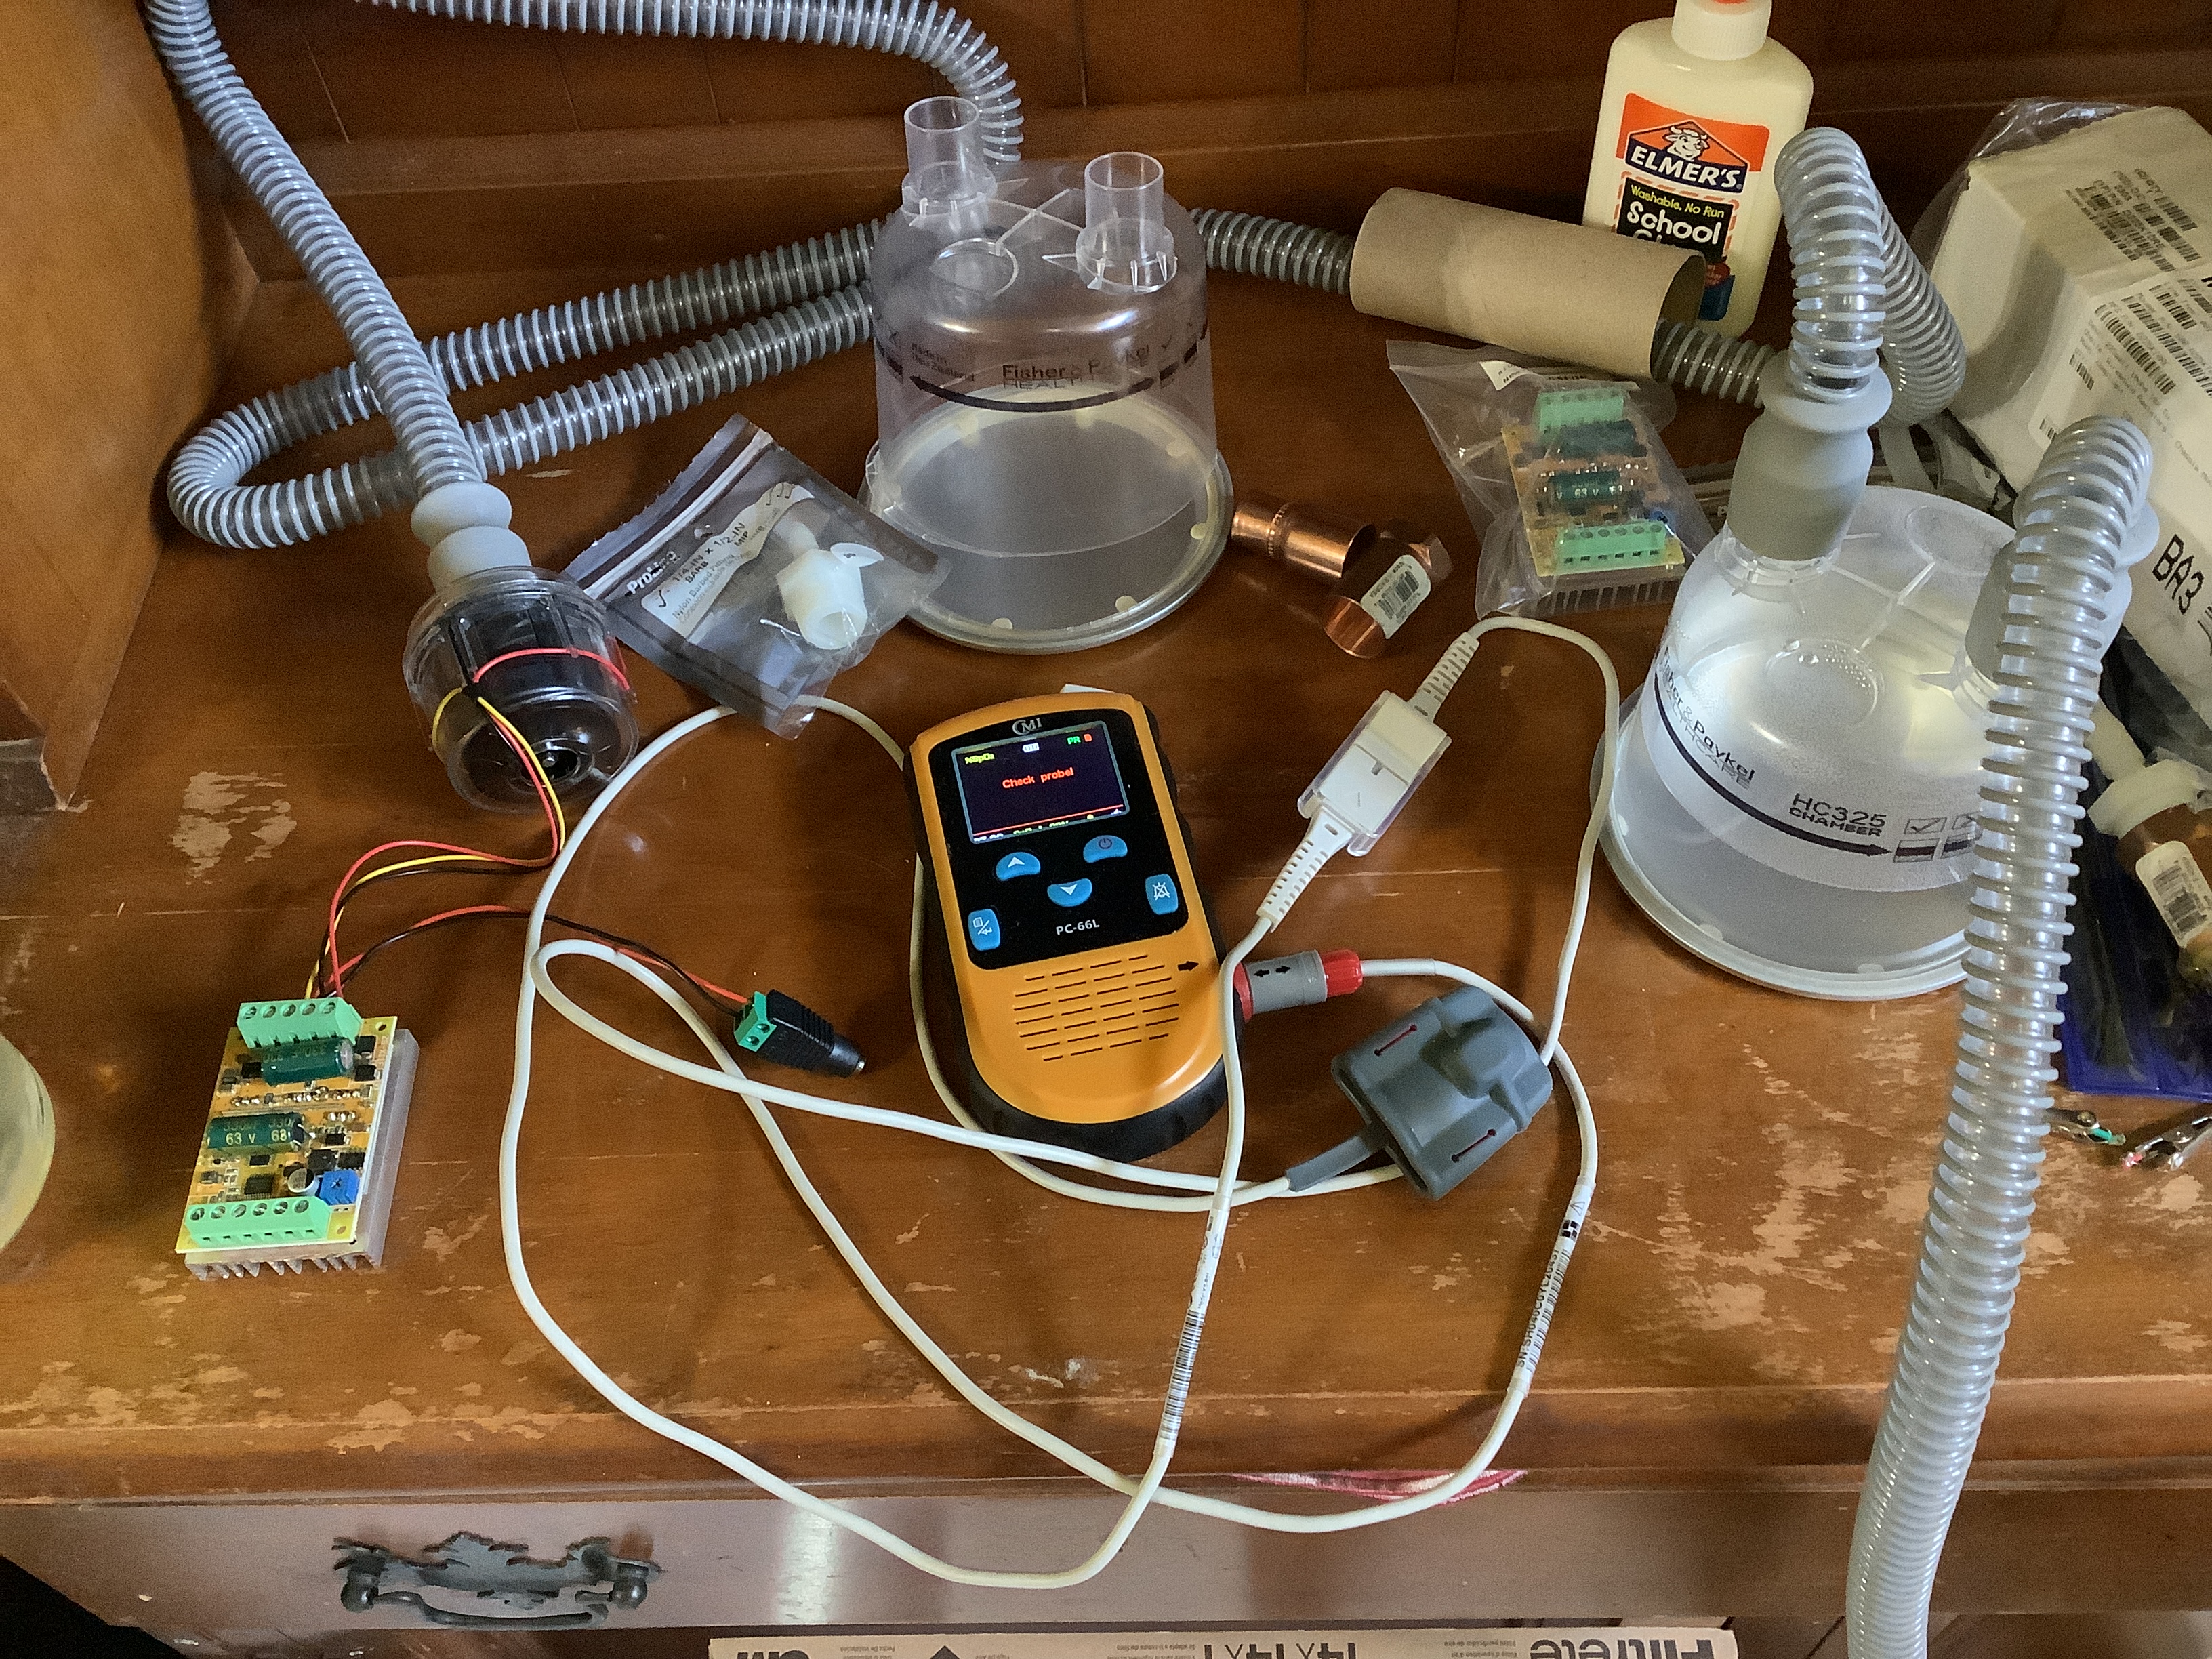 Oximeter I use to make sure my CPAP is working